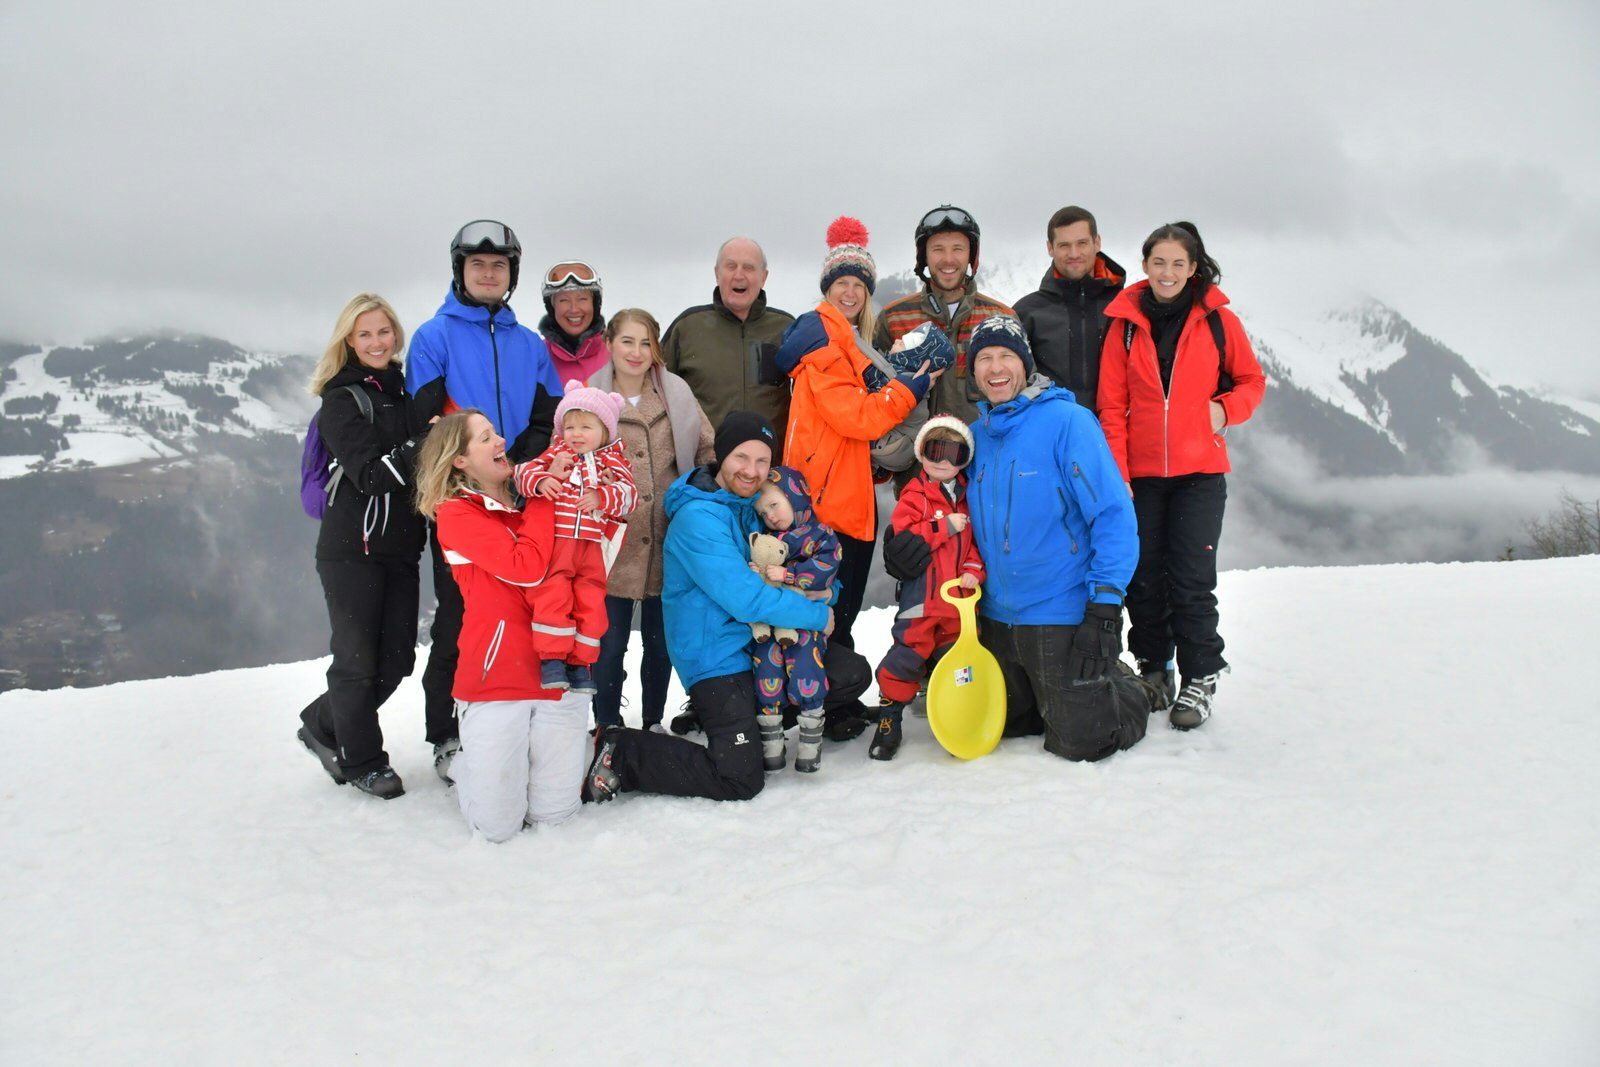 The Cole family in Morzine, France on a snowy mountain wearing ski gear